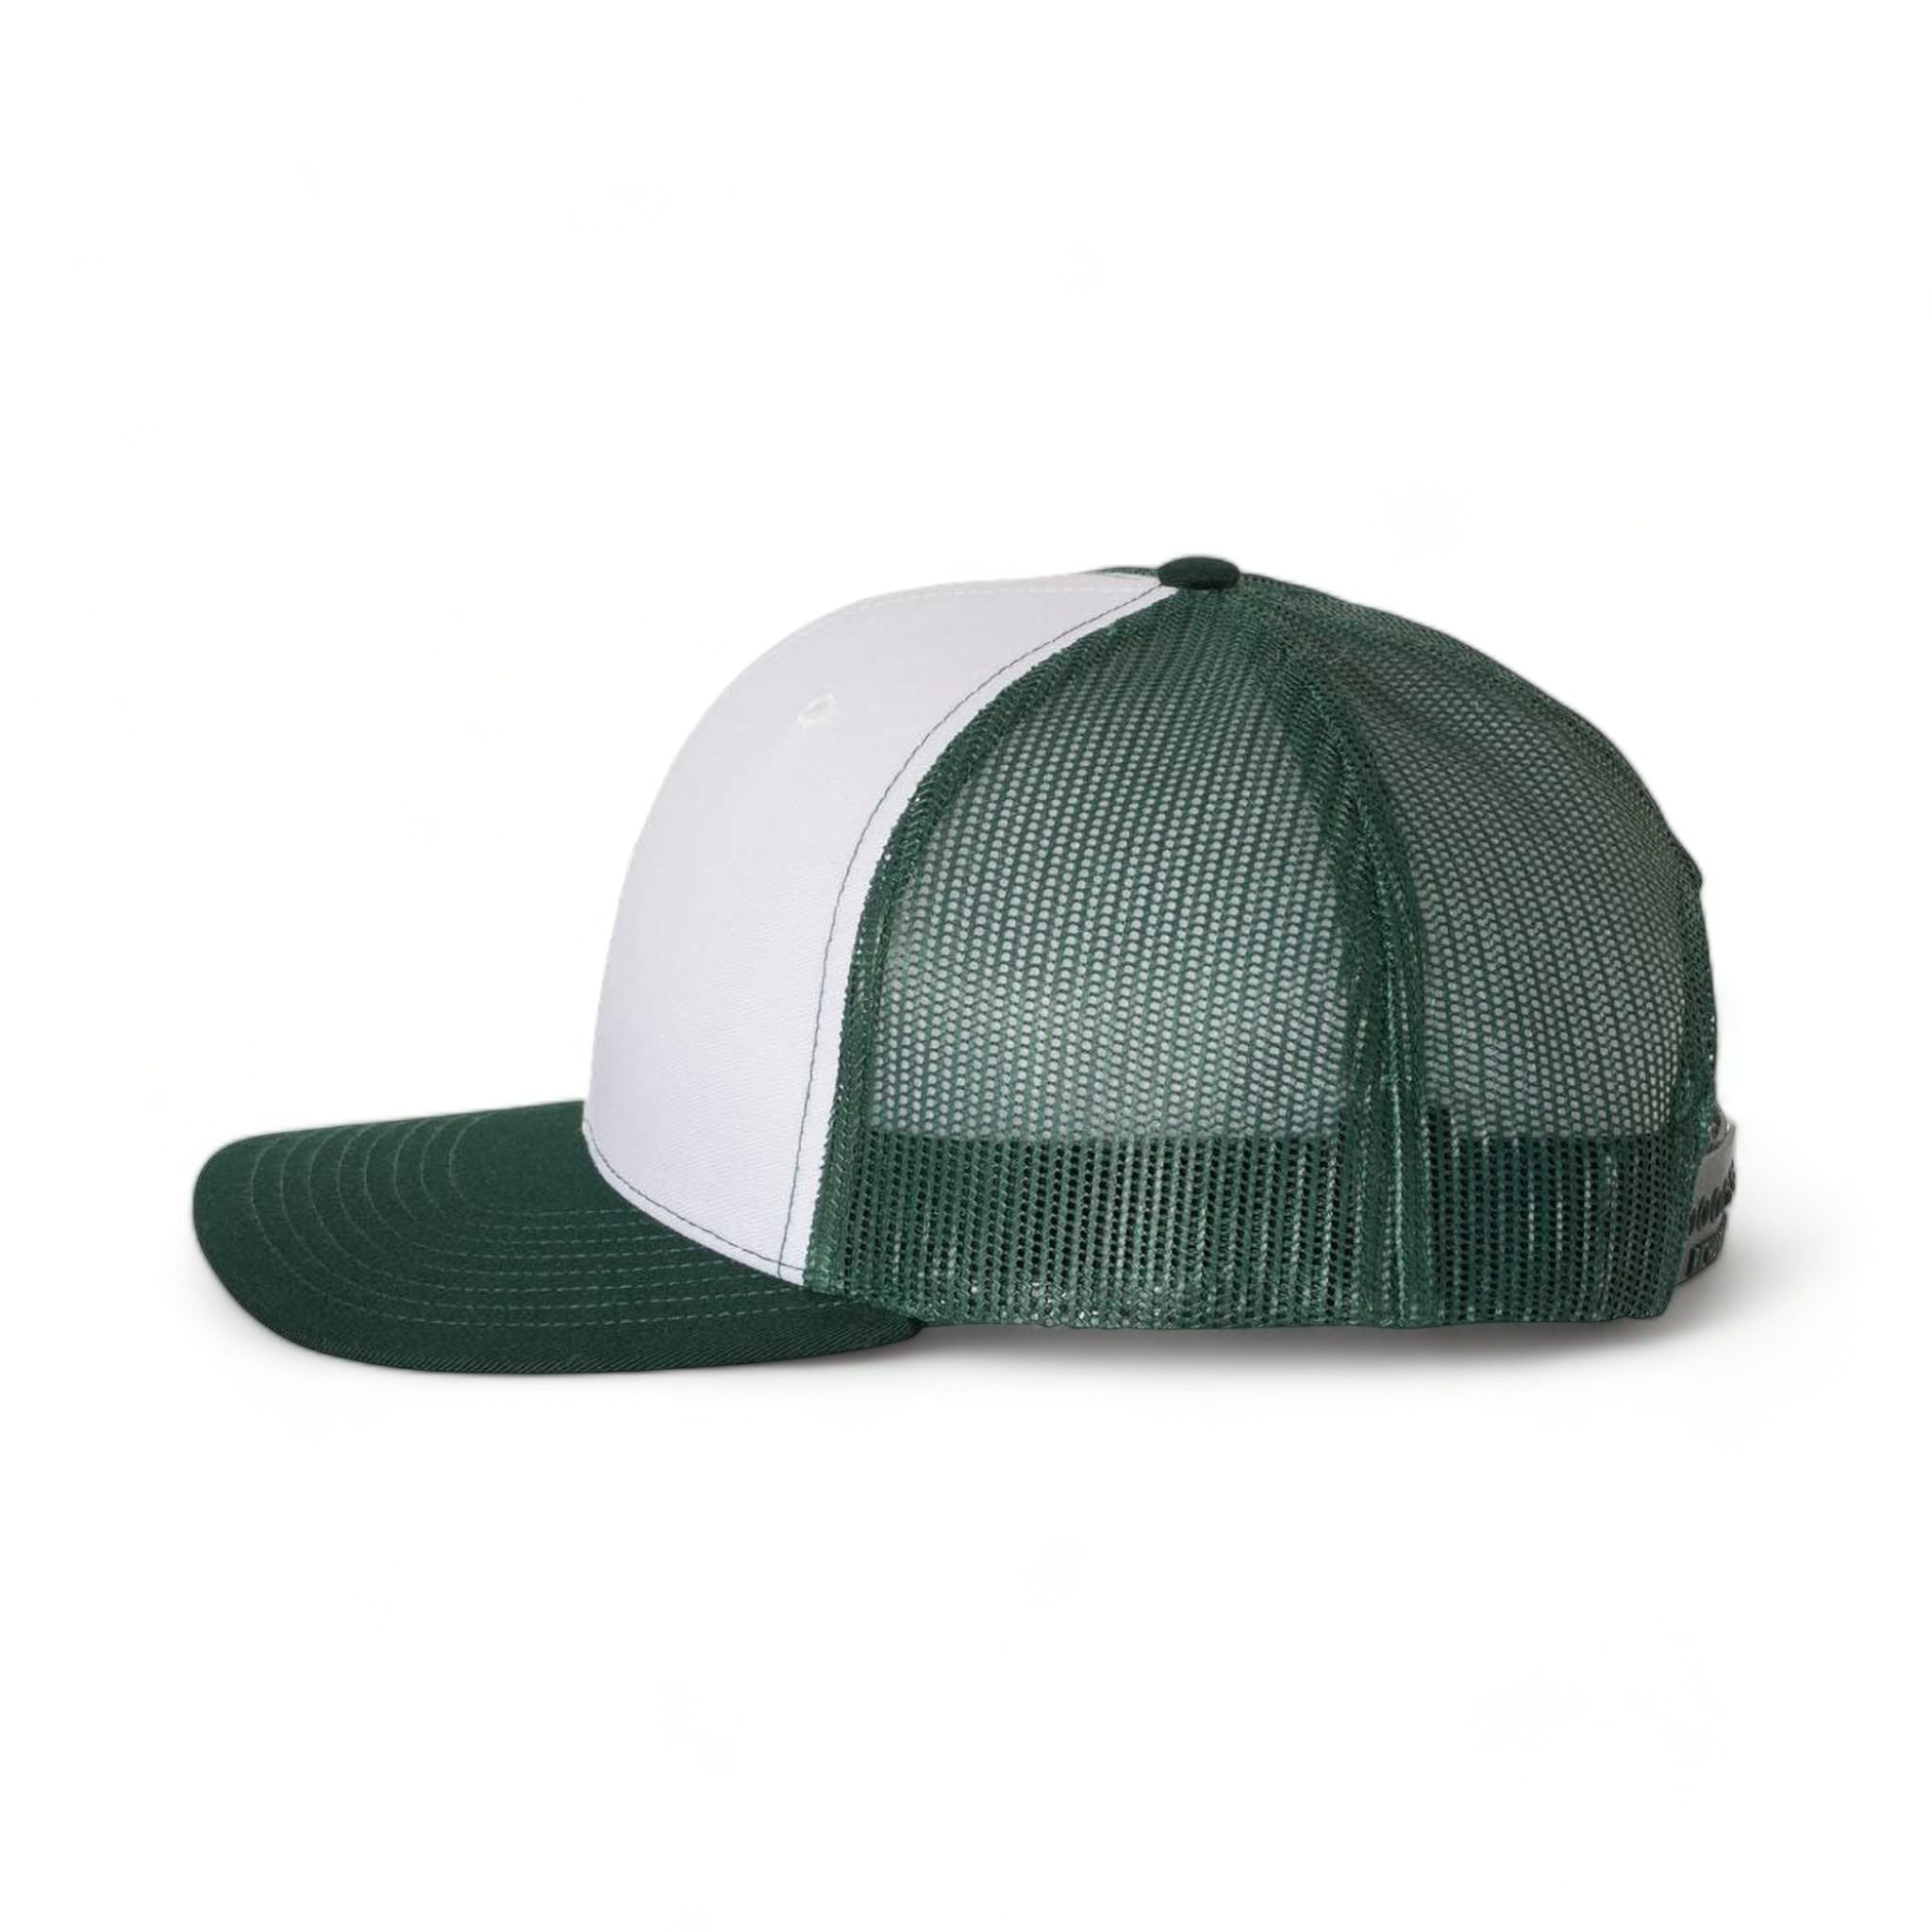 Side view of Richardson 112 custom hat in white and dark green